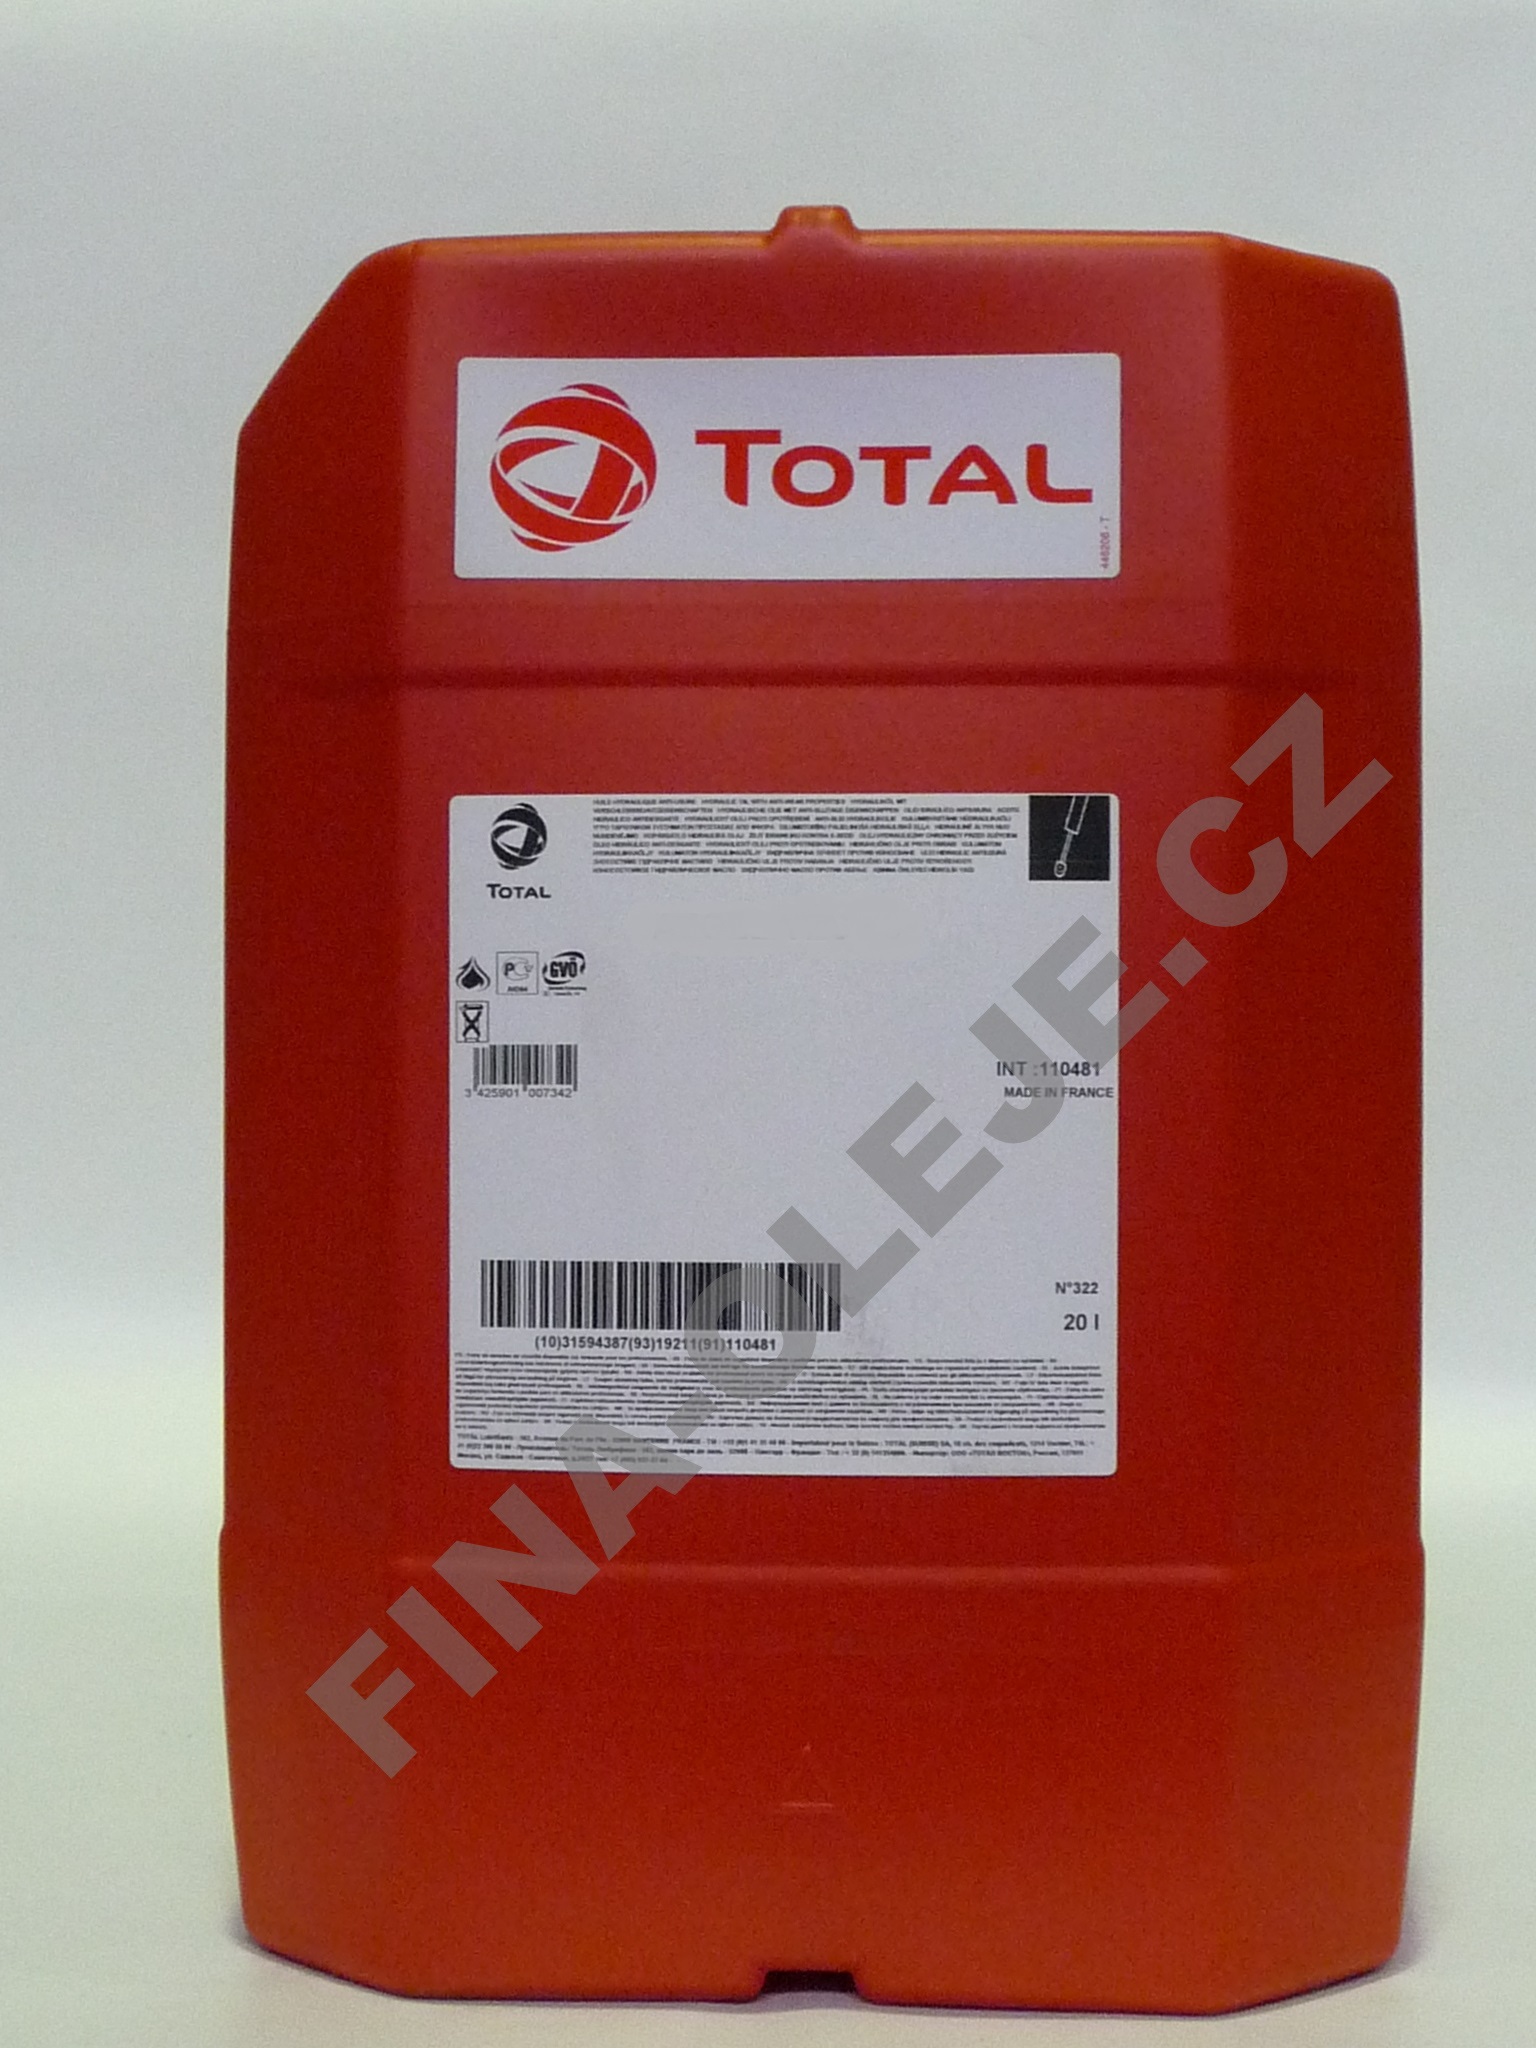 TOTAL CARTER SY 460 - 20 L